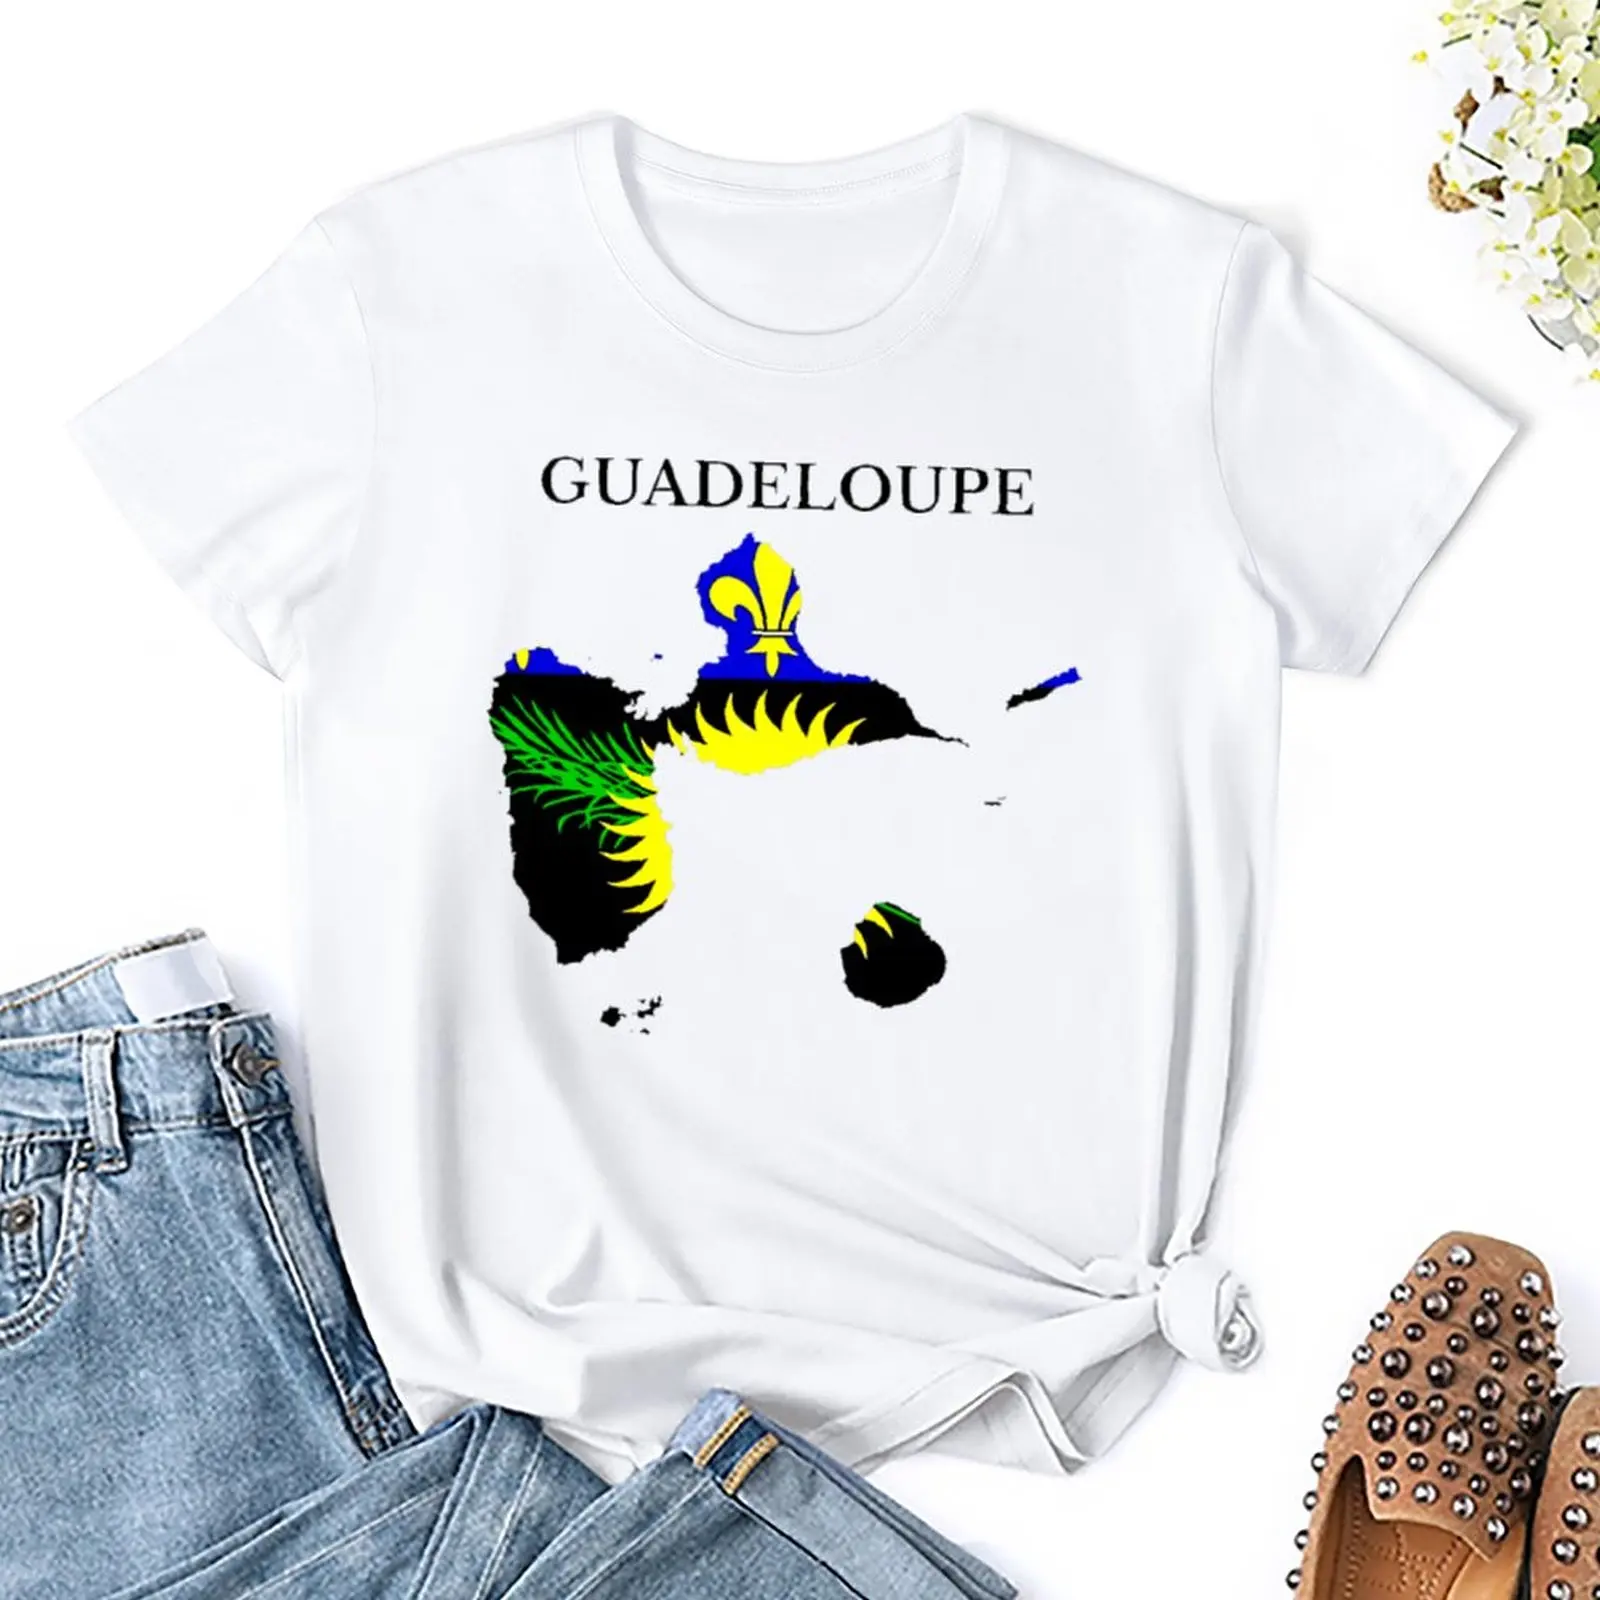 

Guadeloupe Map Flag, France, French Region Party New Design Motion Top Quality High Grade Tees Travel USA Size